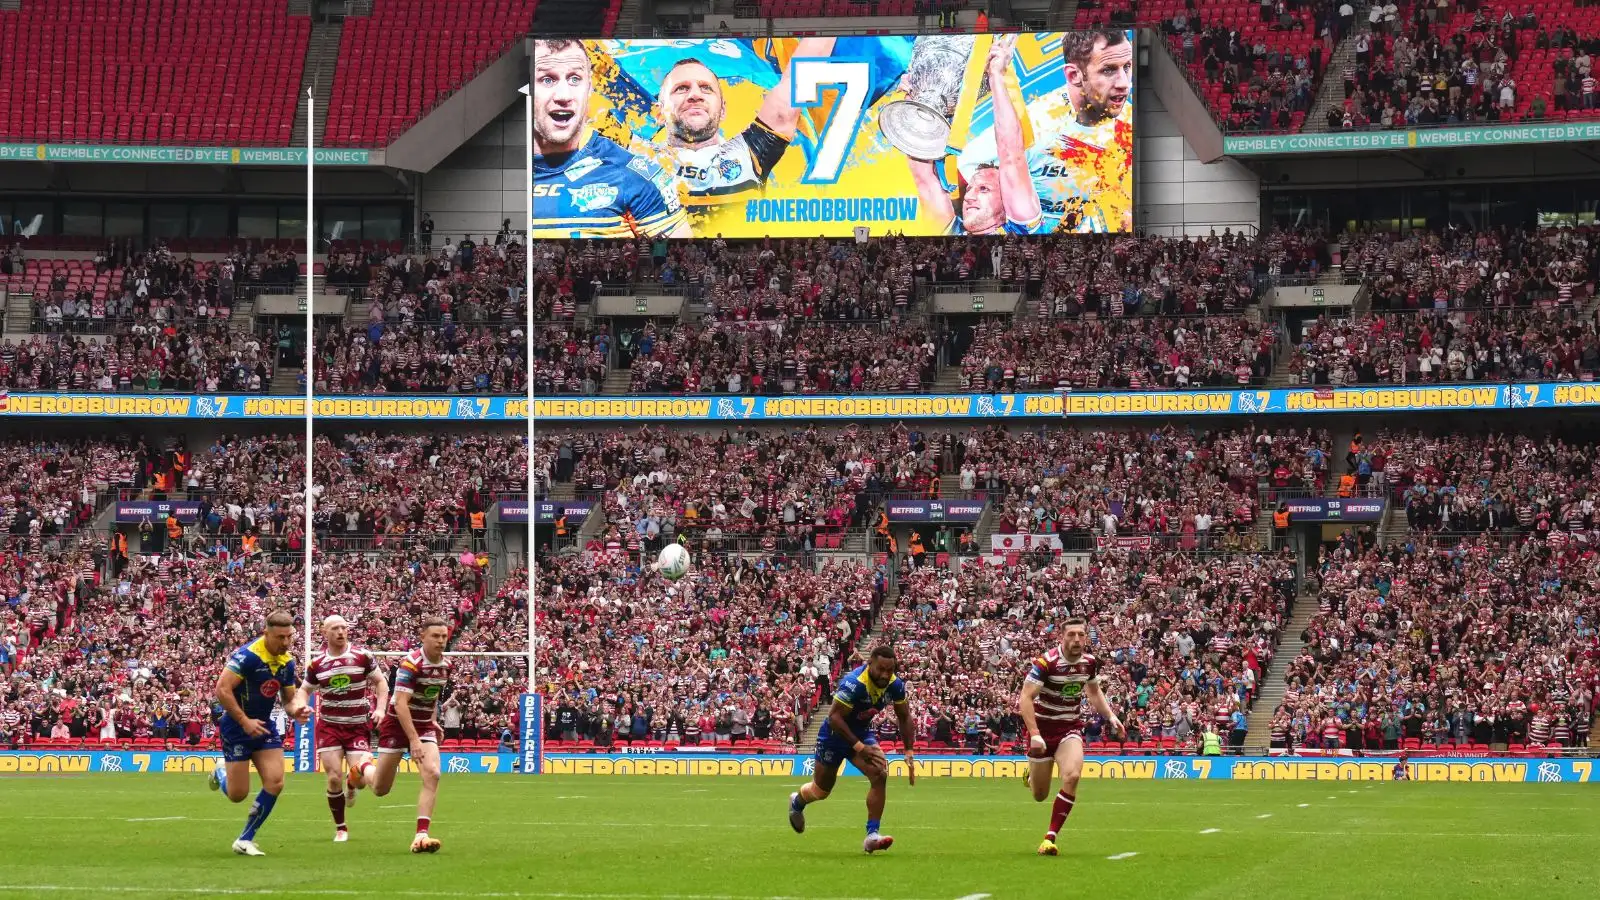 One Rob Burrow on Wembley big screen during 2024 Challenge Cup final